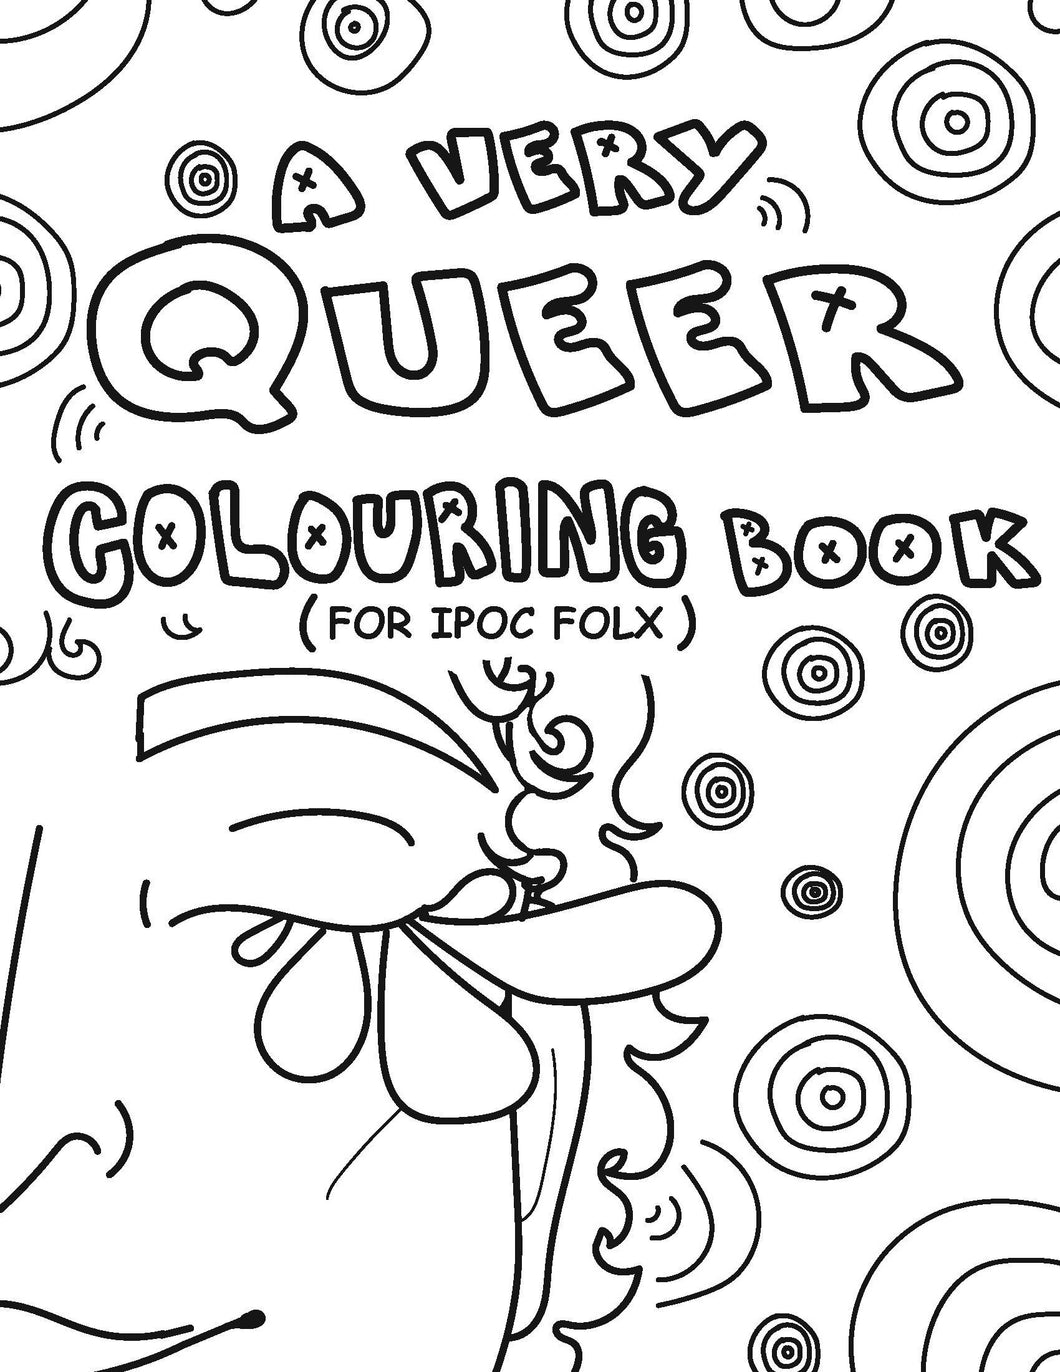 A Very Queer Colouring Book (for IPOC)